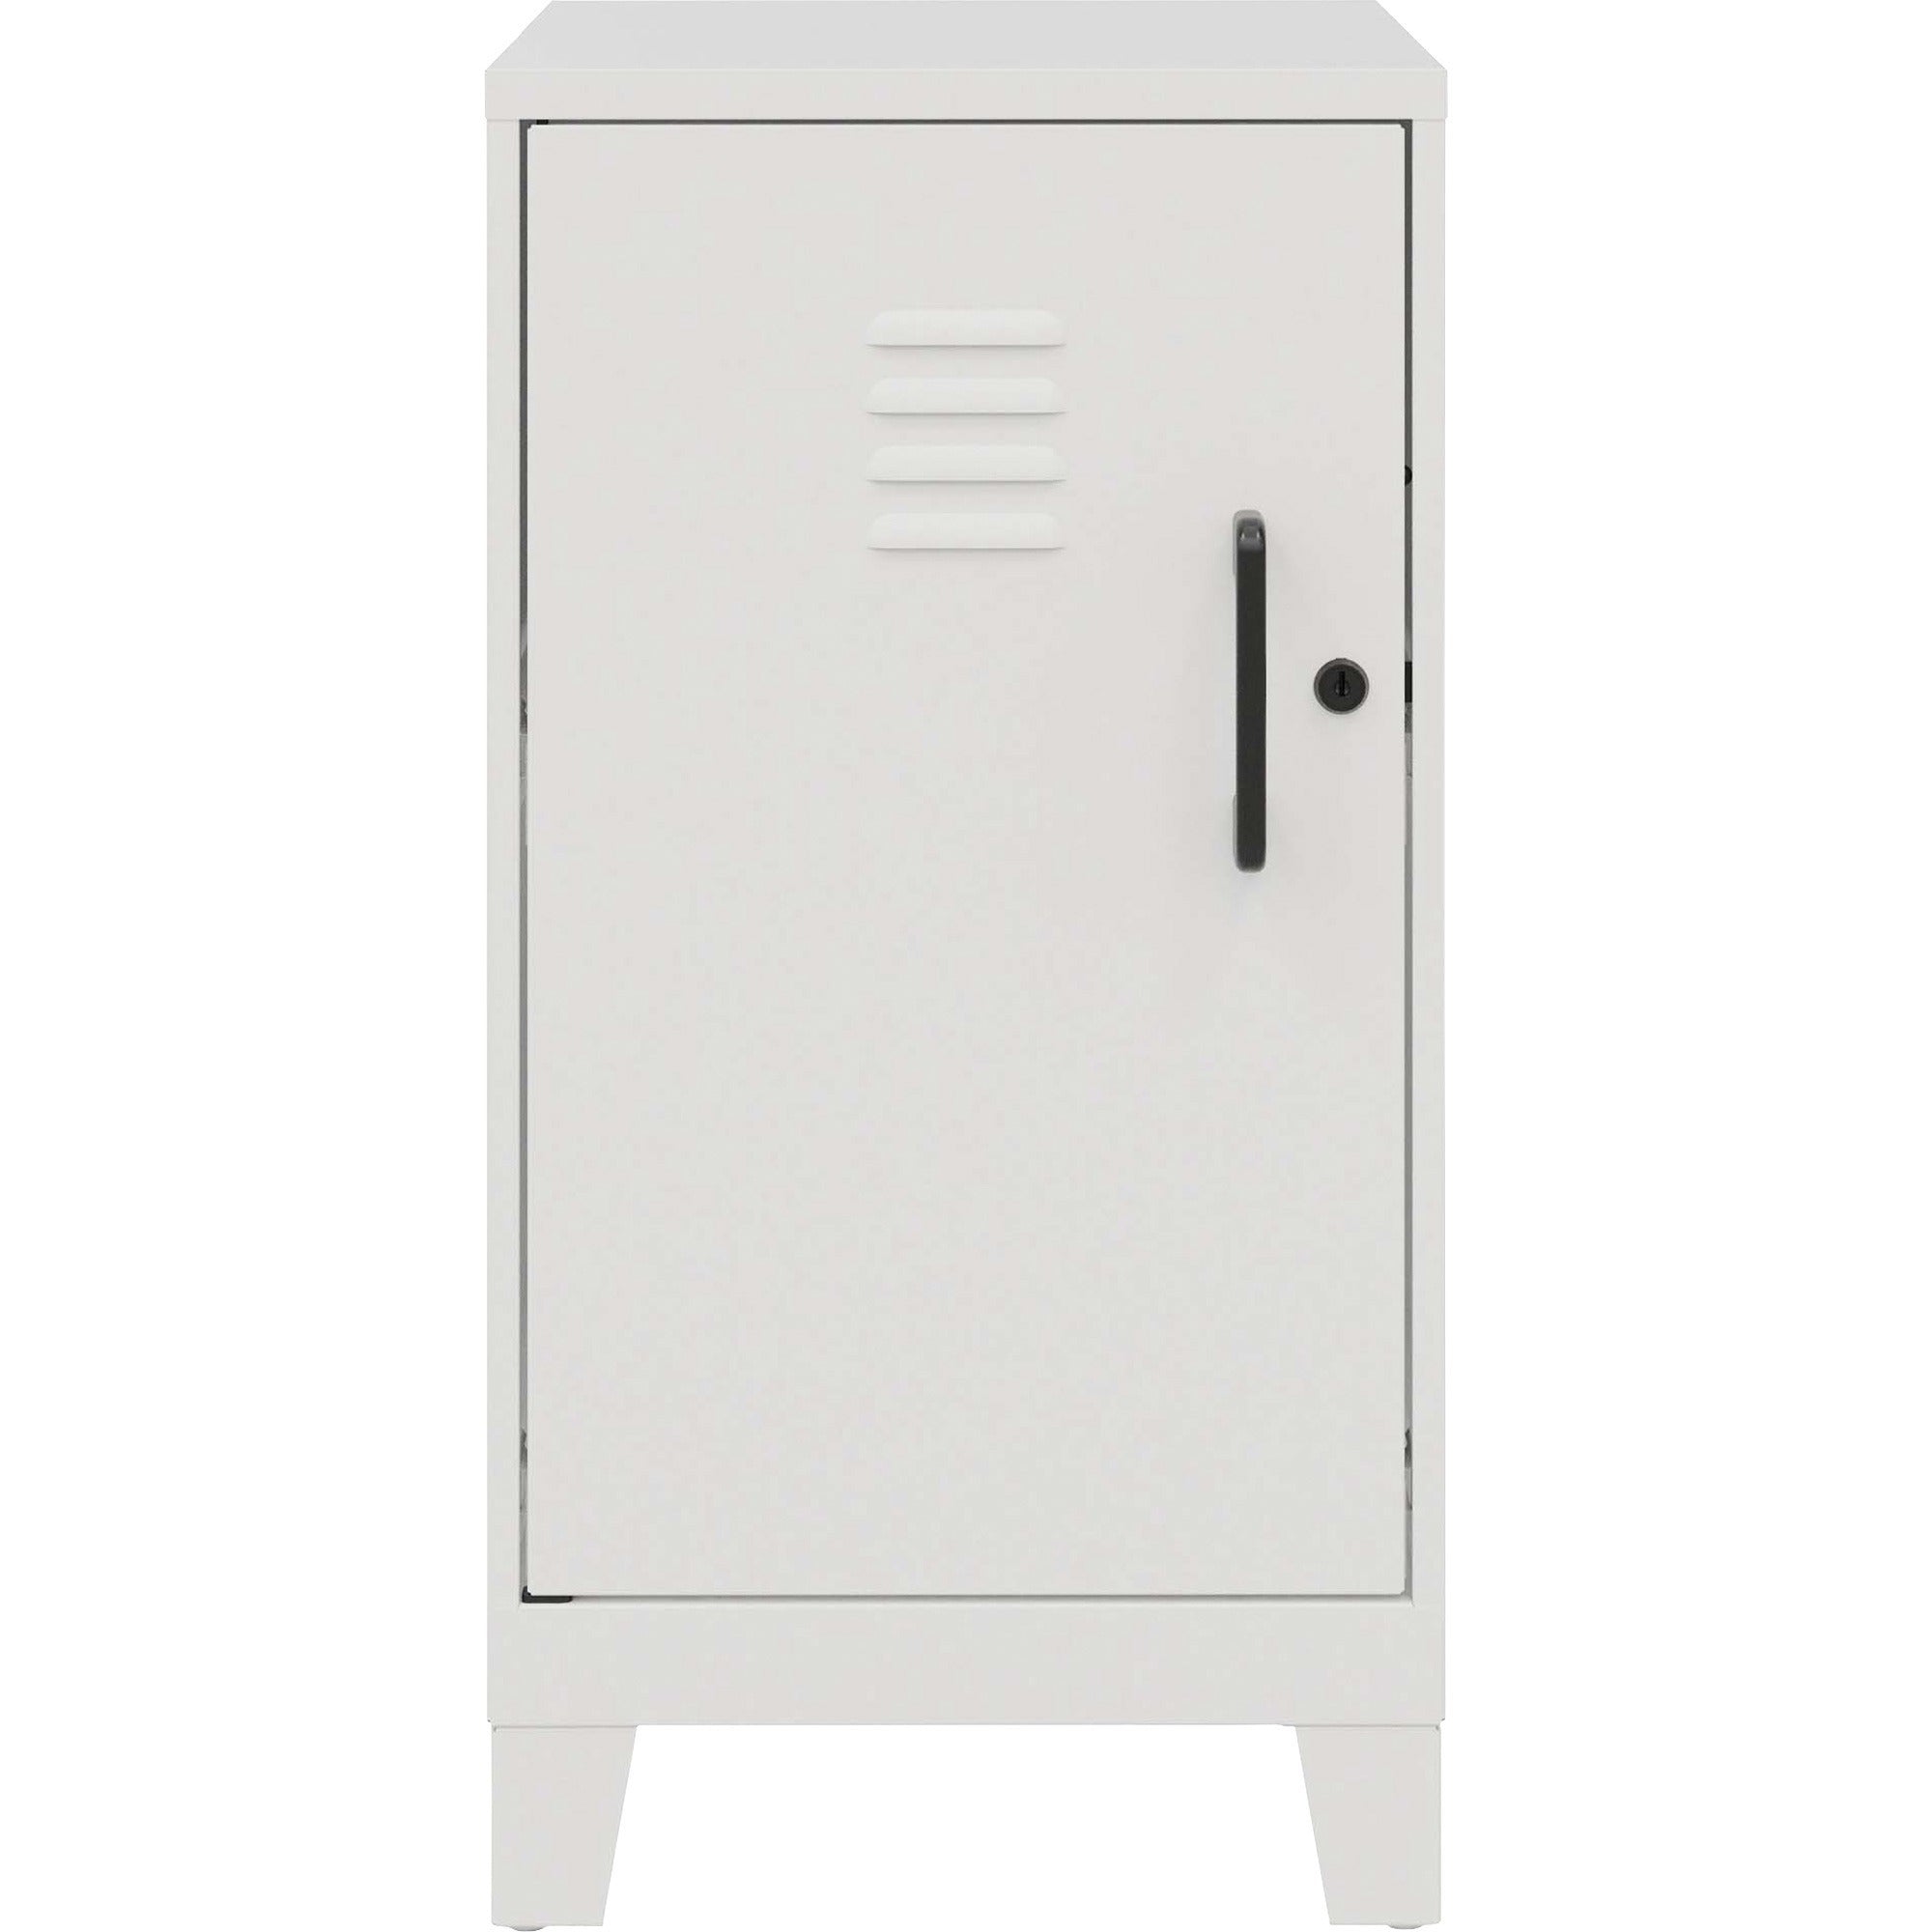 nusparc-personal-locker-2-shelves-for-office-home-sport-equipments-toy-game-classroom-playroom-basement-garage-overall-size-275-x-142-x-18-white-steel-taa-compliant_nprsl218zzwe - 2